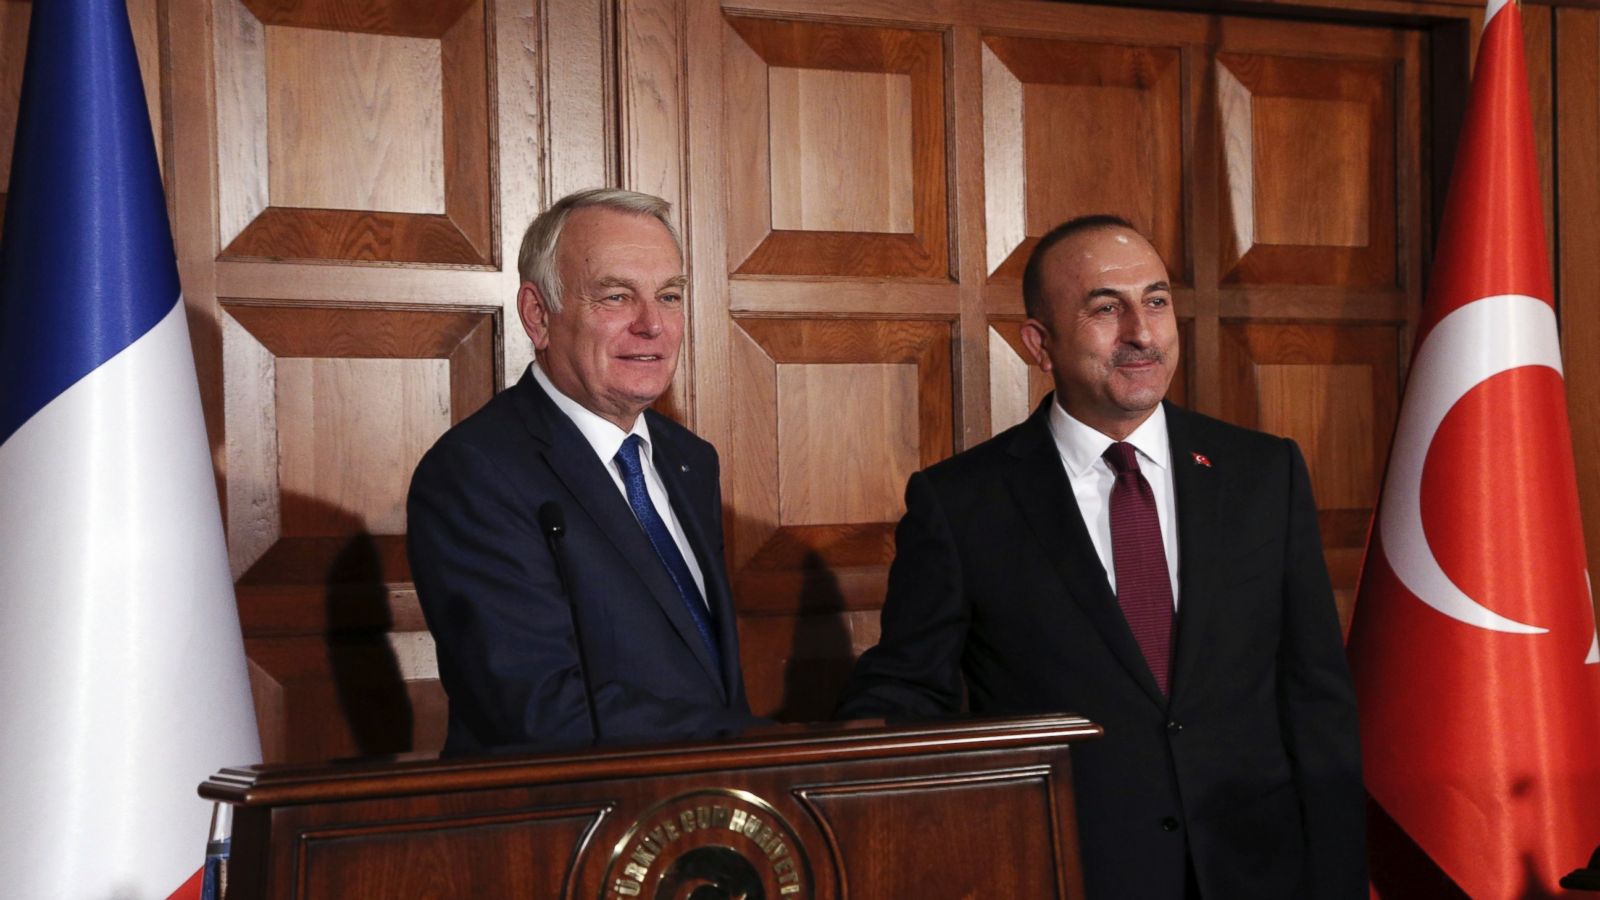 France's Foreign Minister Jean-Marc Ayrault, left, and his Turkish counterpart Mevlut Cavusoglu shake hands after a joint news conference in Ankara, Turkey, Monday, Oct. 24, 2016. Ayrault has called for an end of the 